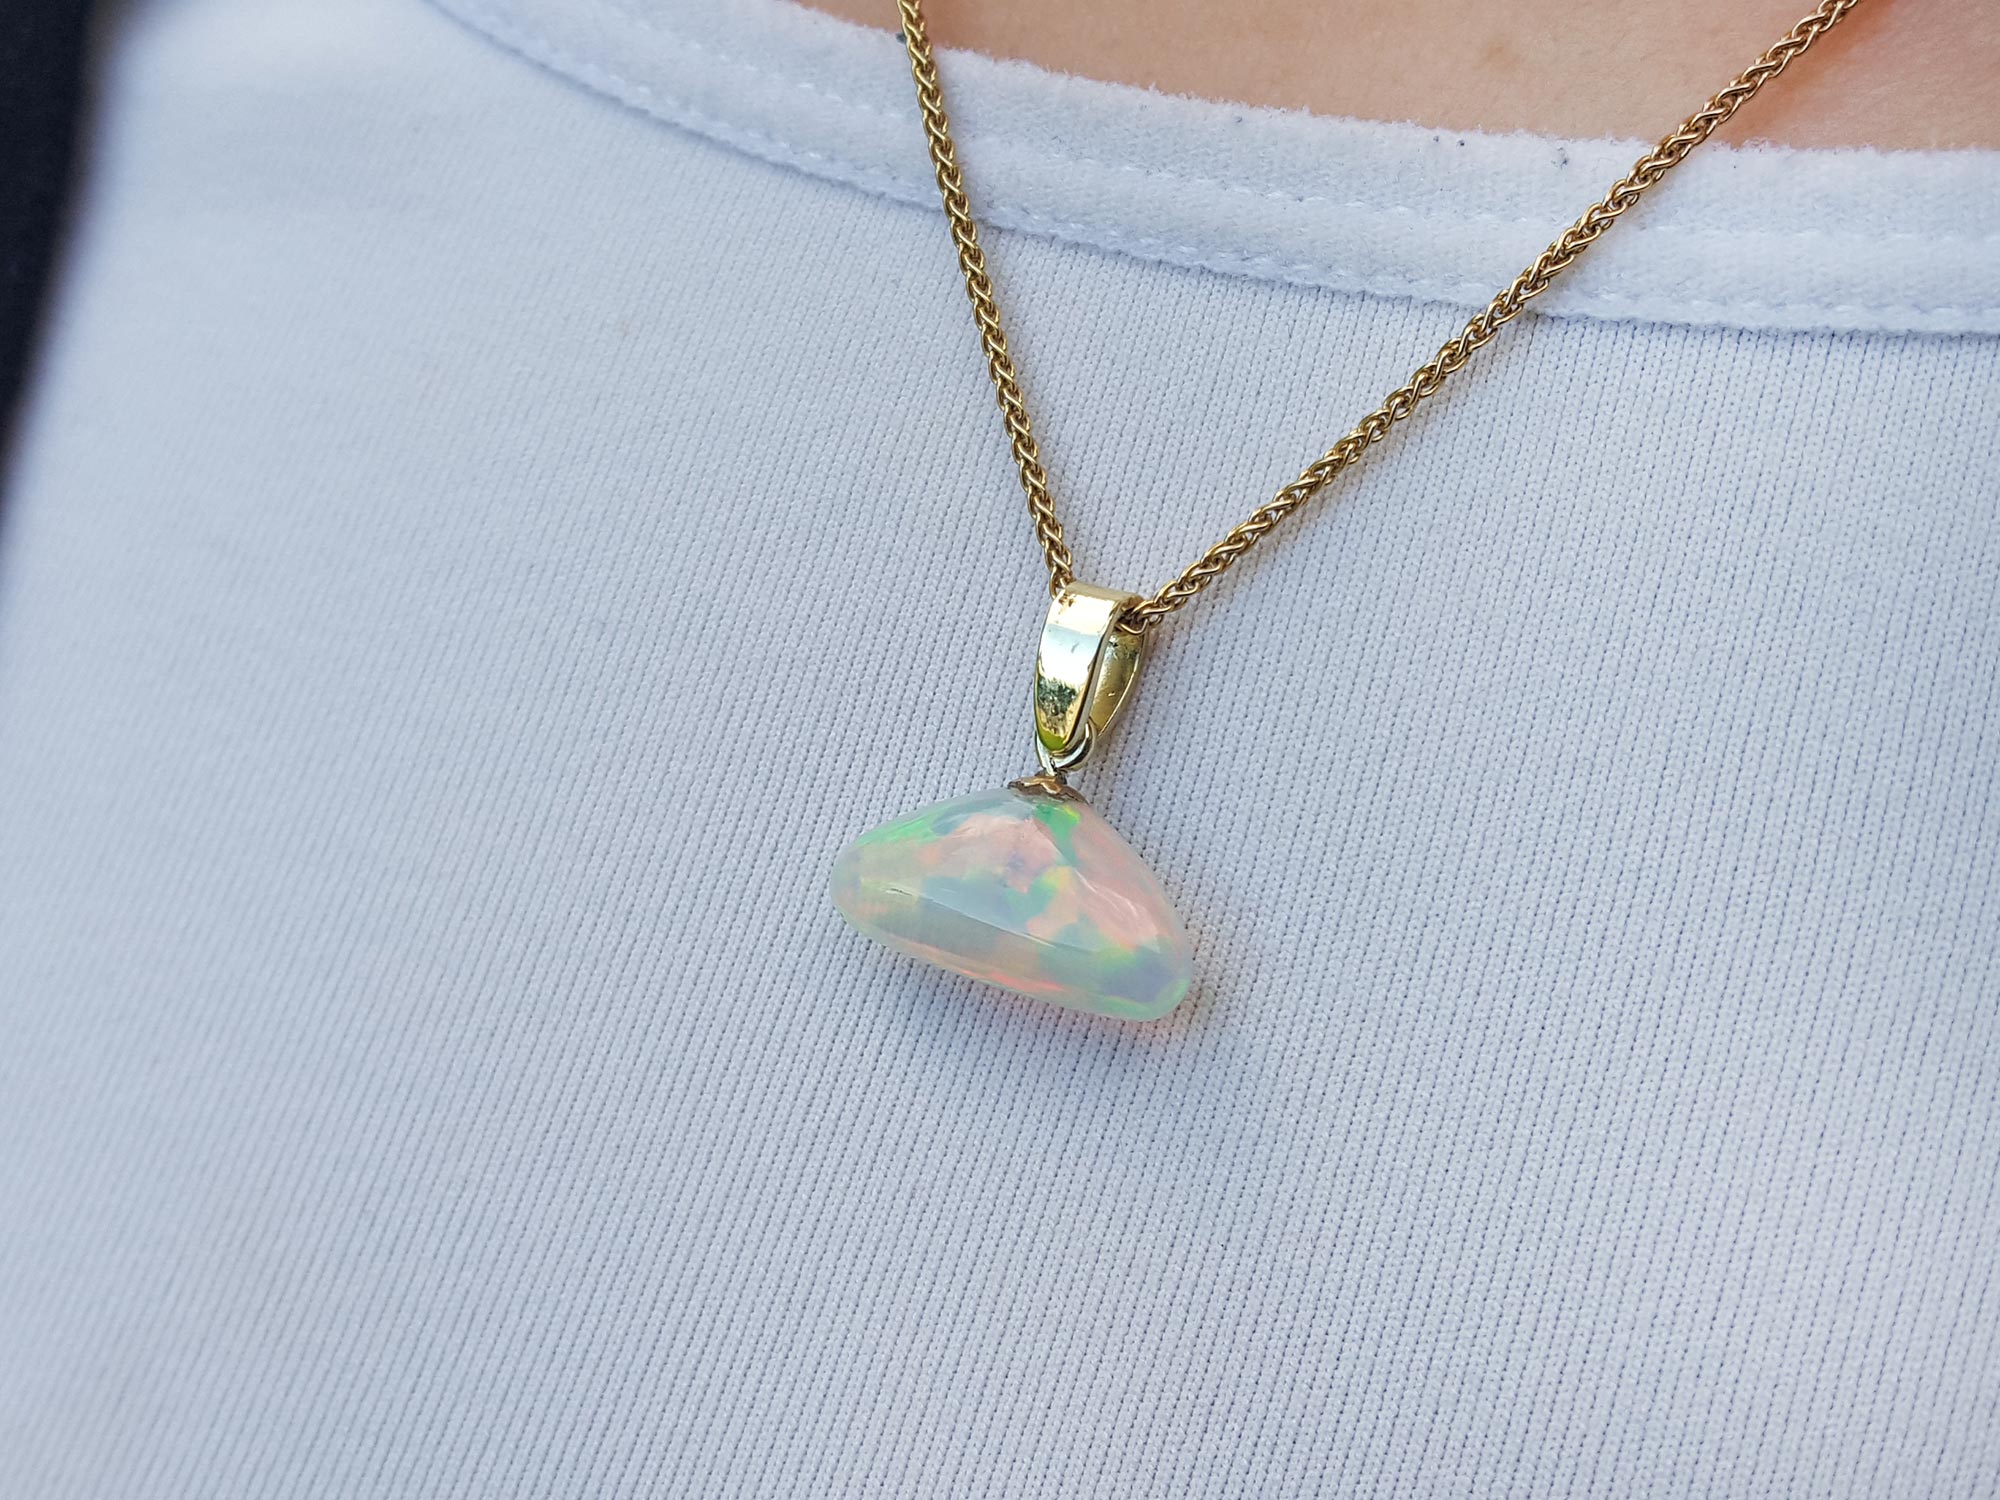 Crystal opal necklace